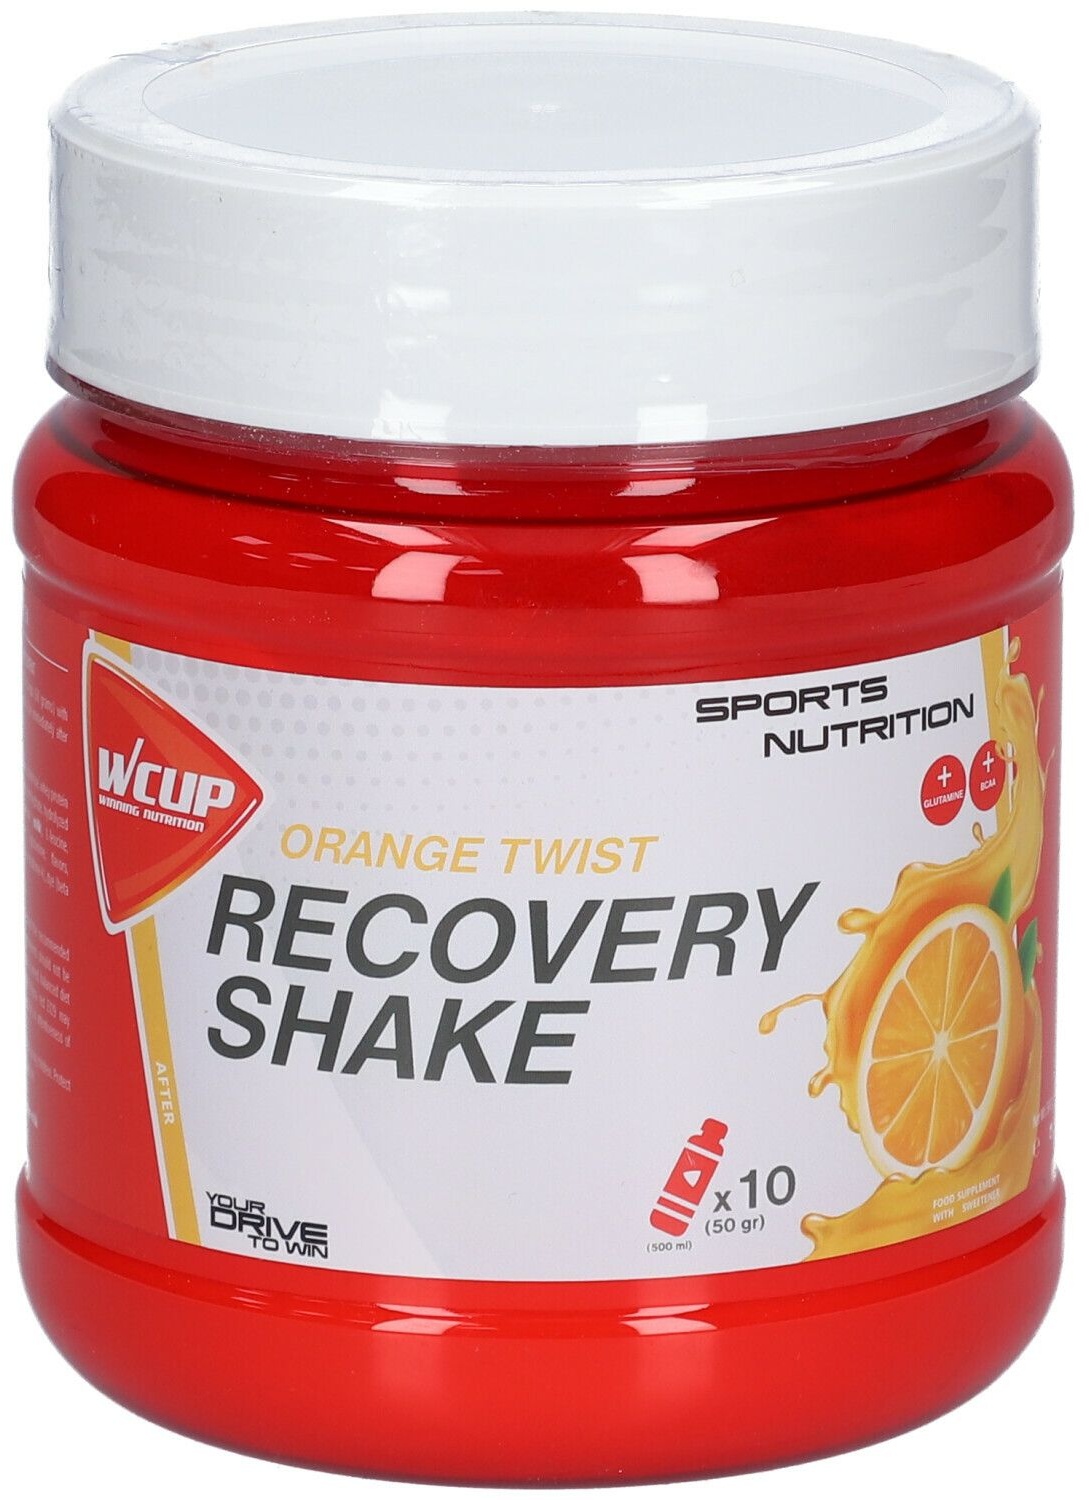 WCUP RECOVERY SHAKE ORANGE TWIST 500 g Poudre